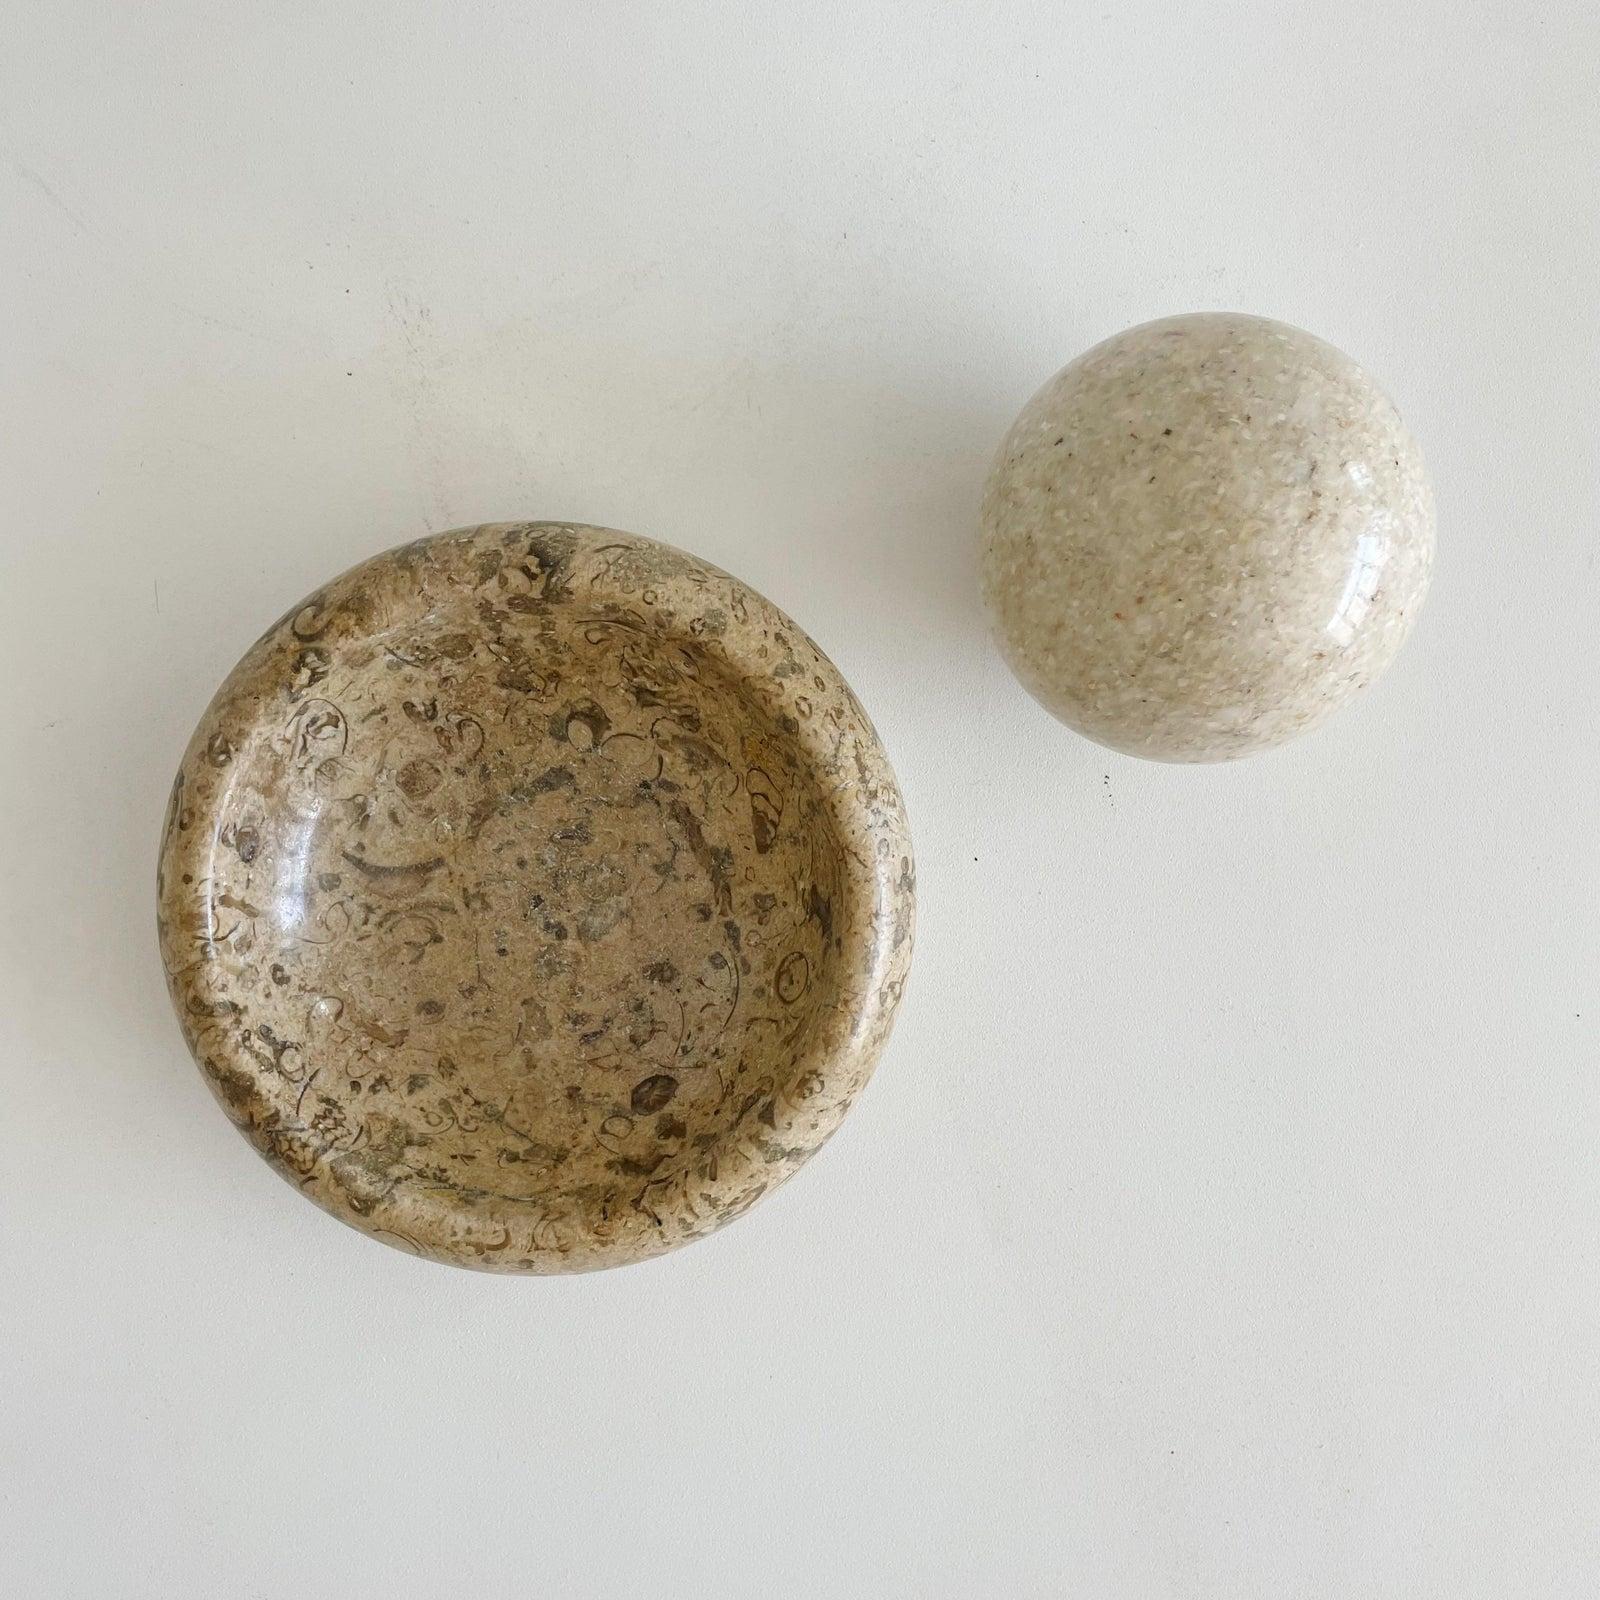 Small vide poche in tan and brown marble with decorative ball accessory. Unsigned.